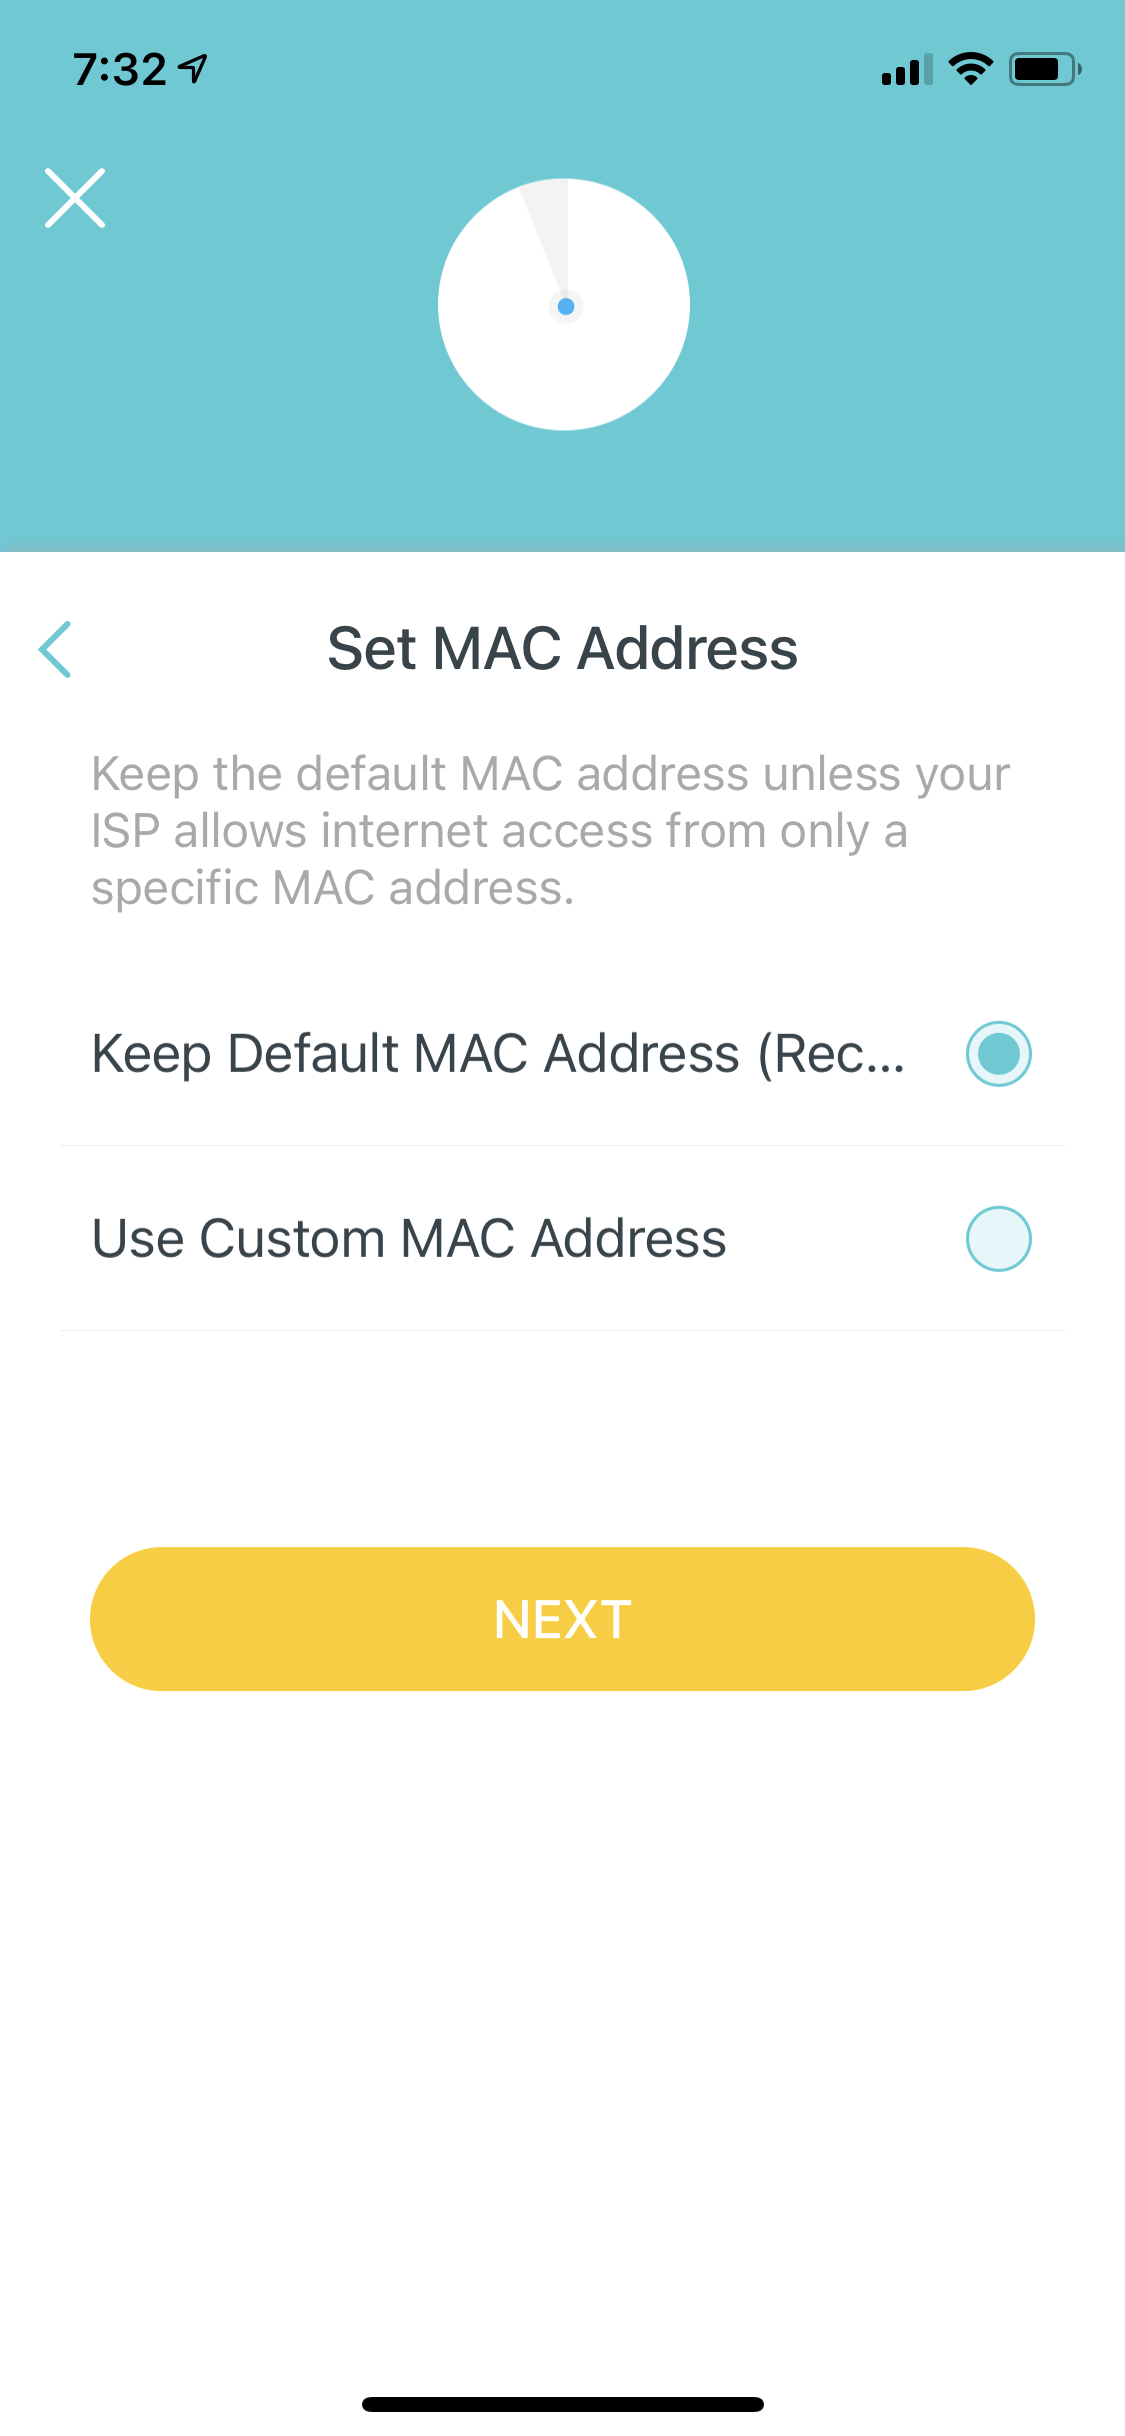 Built-in support for spoofing your MAC address!